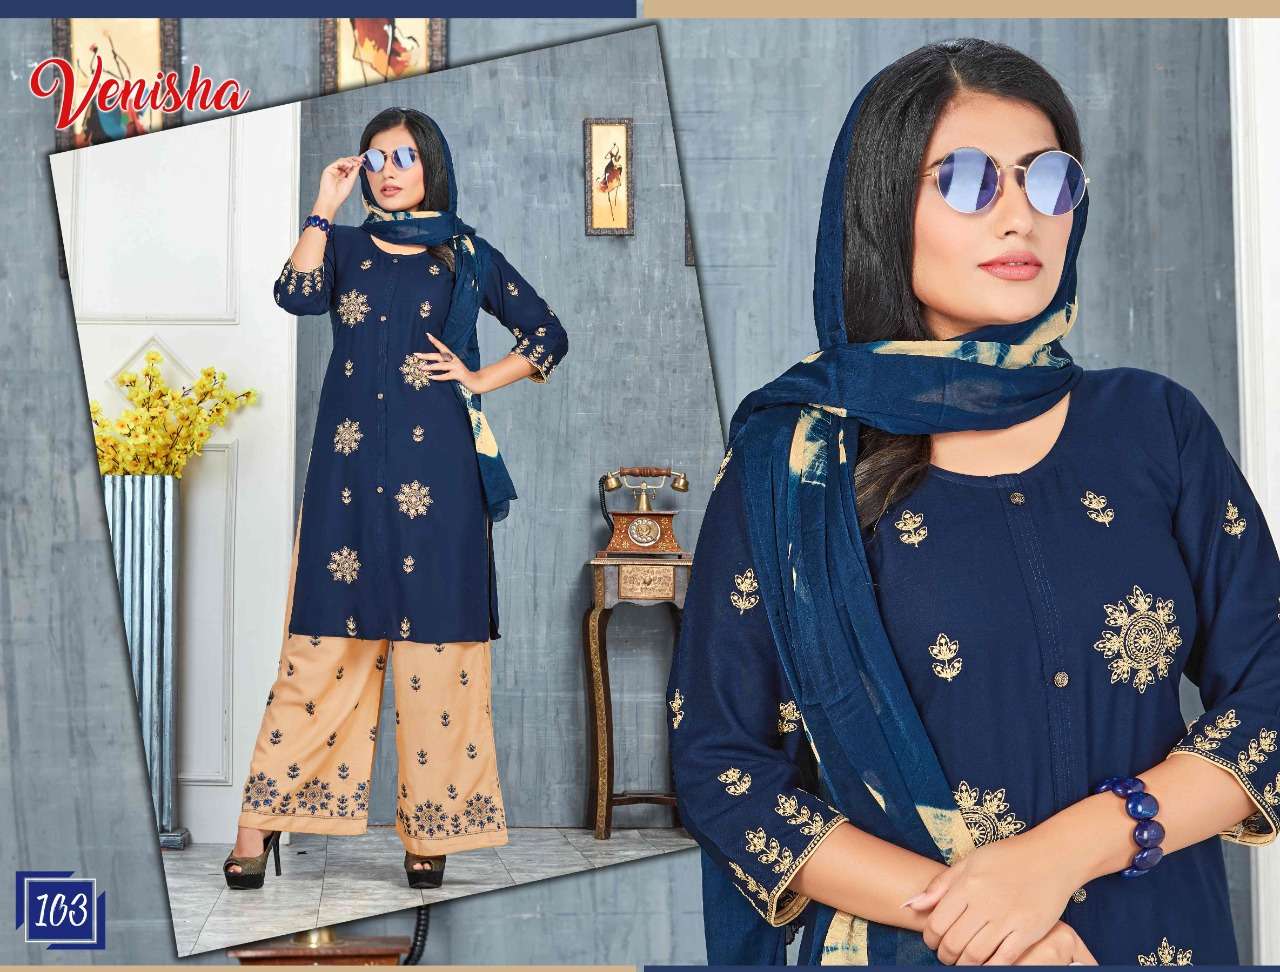 SRINAGAR BY VENISHA 101 TO 106 SERIES BEAUTIFUL SUITS STYLISH FANCY COLORFUL CASUAL WEAR & ETHNIC WEAR RAYON EMBROIDERED DRESSES AT WHOLESALE PRICE